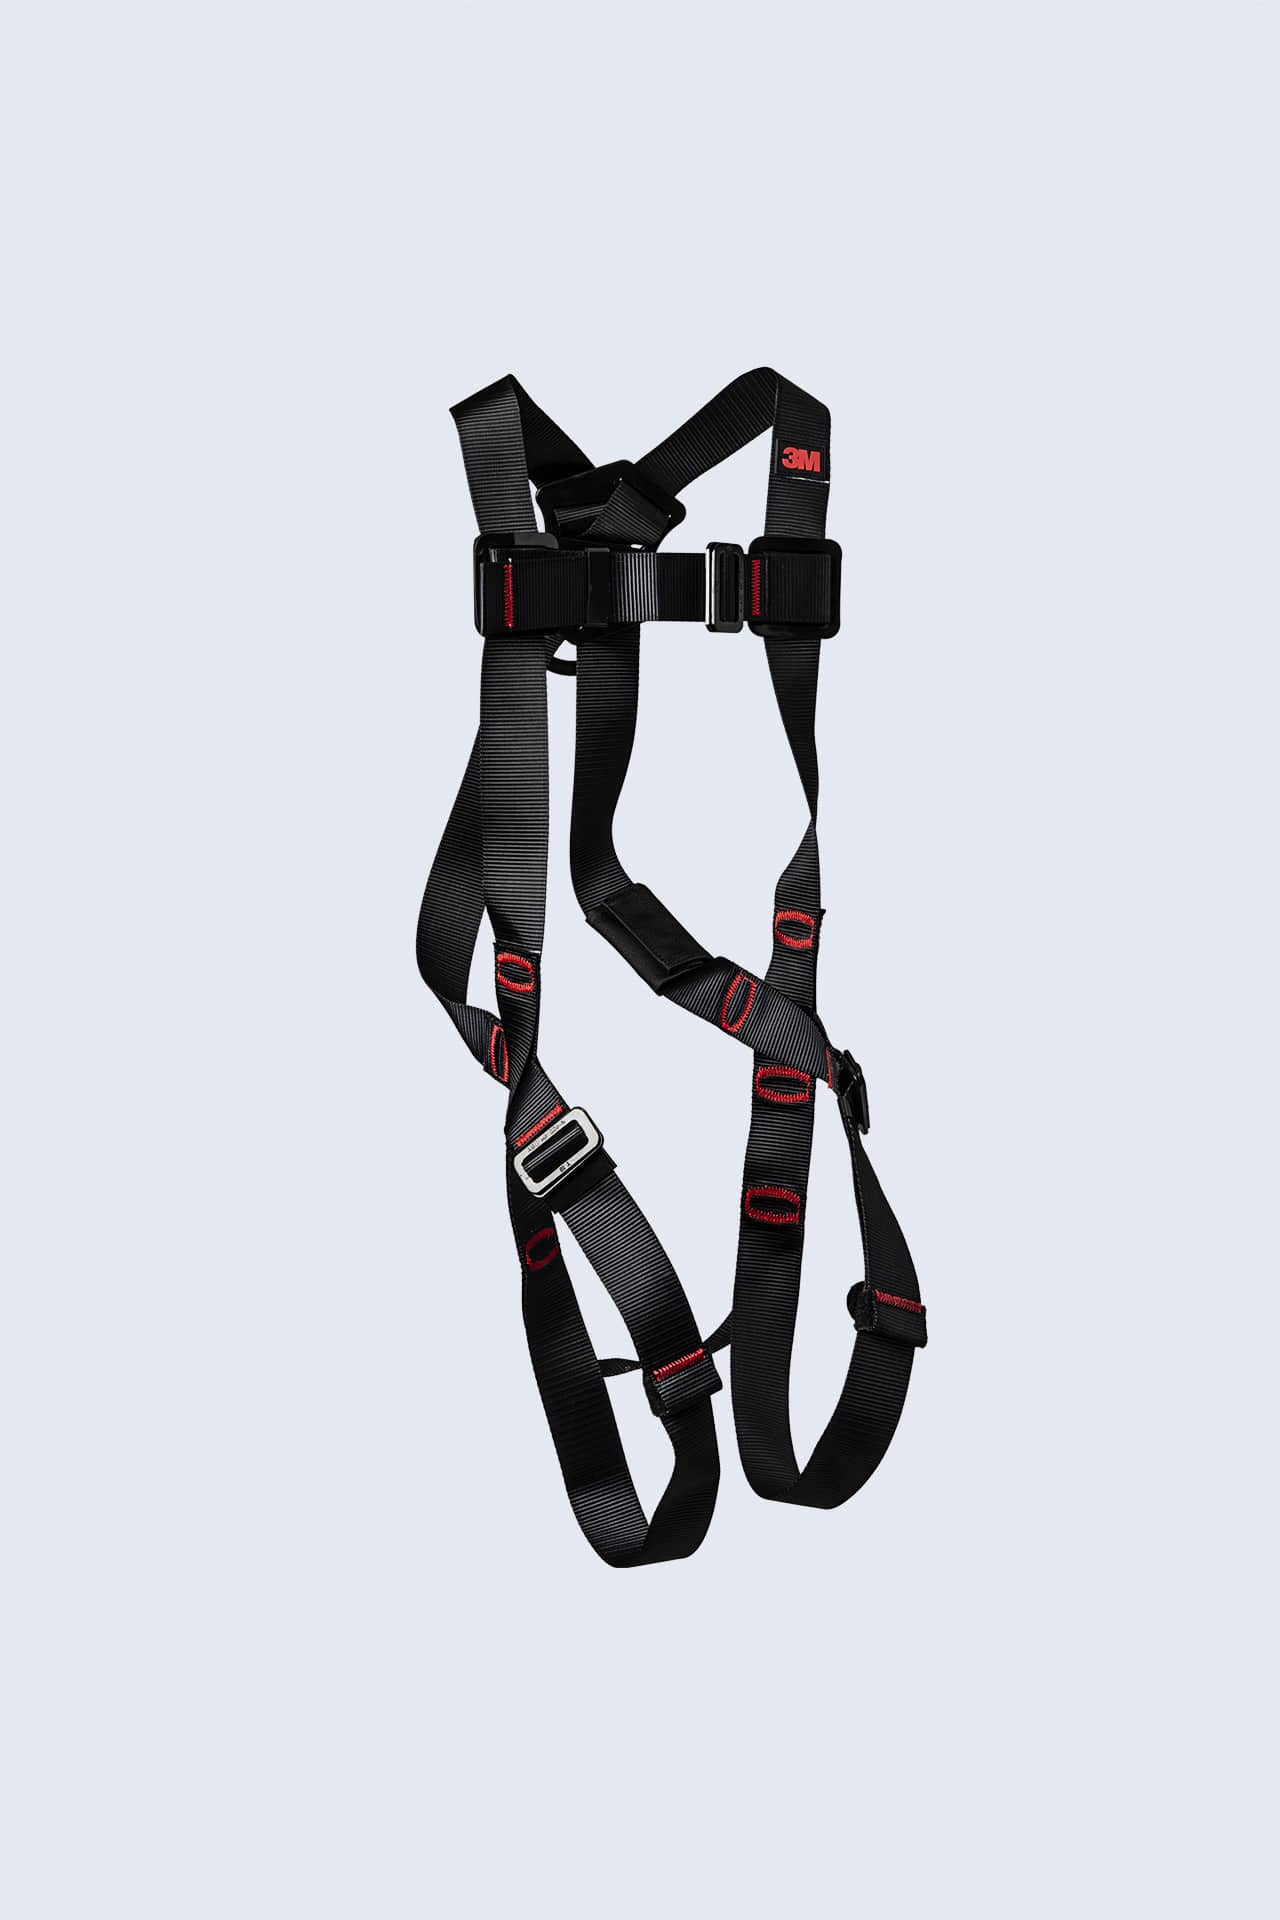 Fall Protection - Scandia Gear